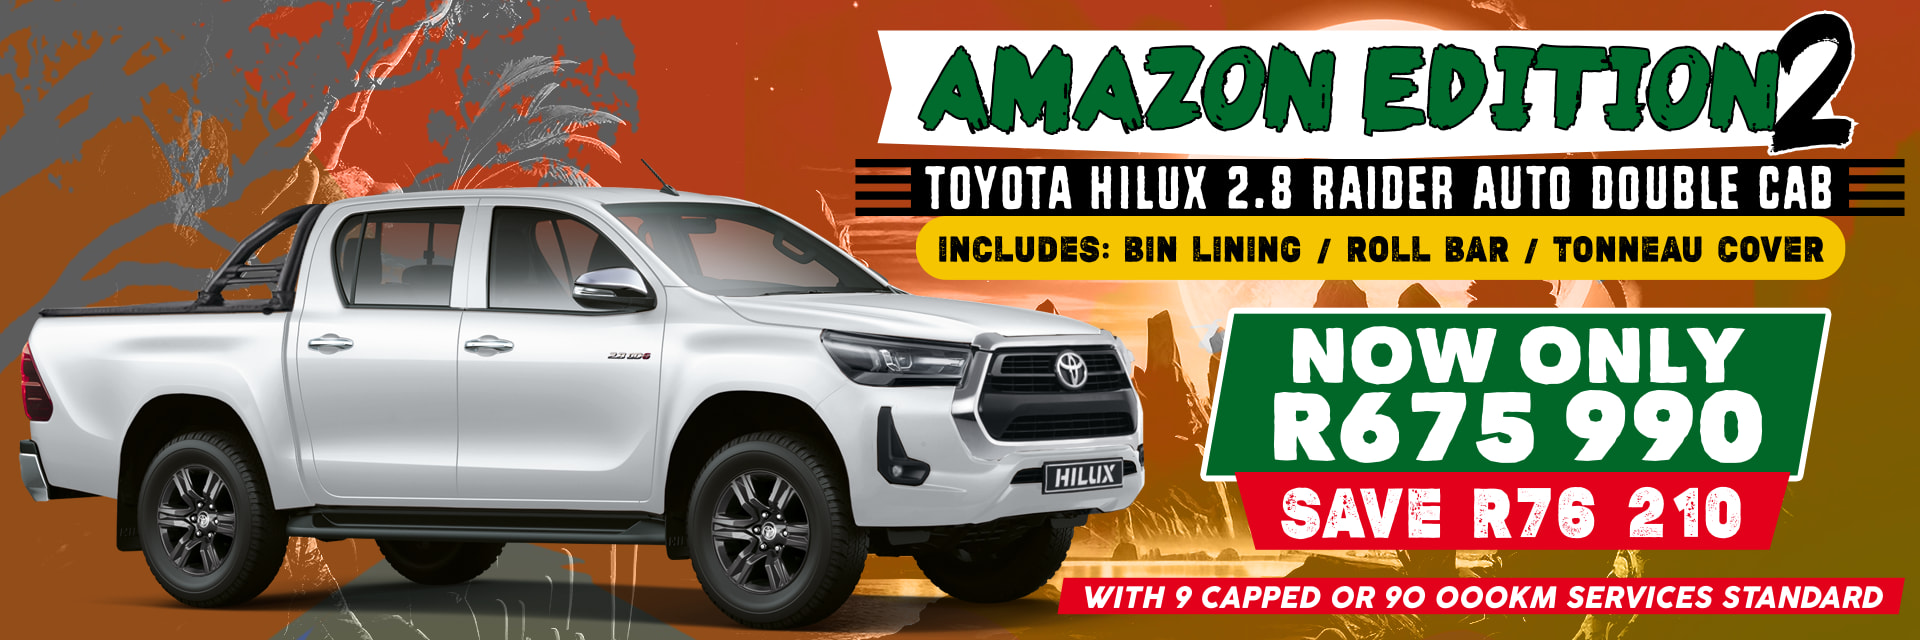 Hilux Amazon II Edition - New Offer